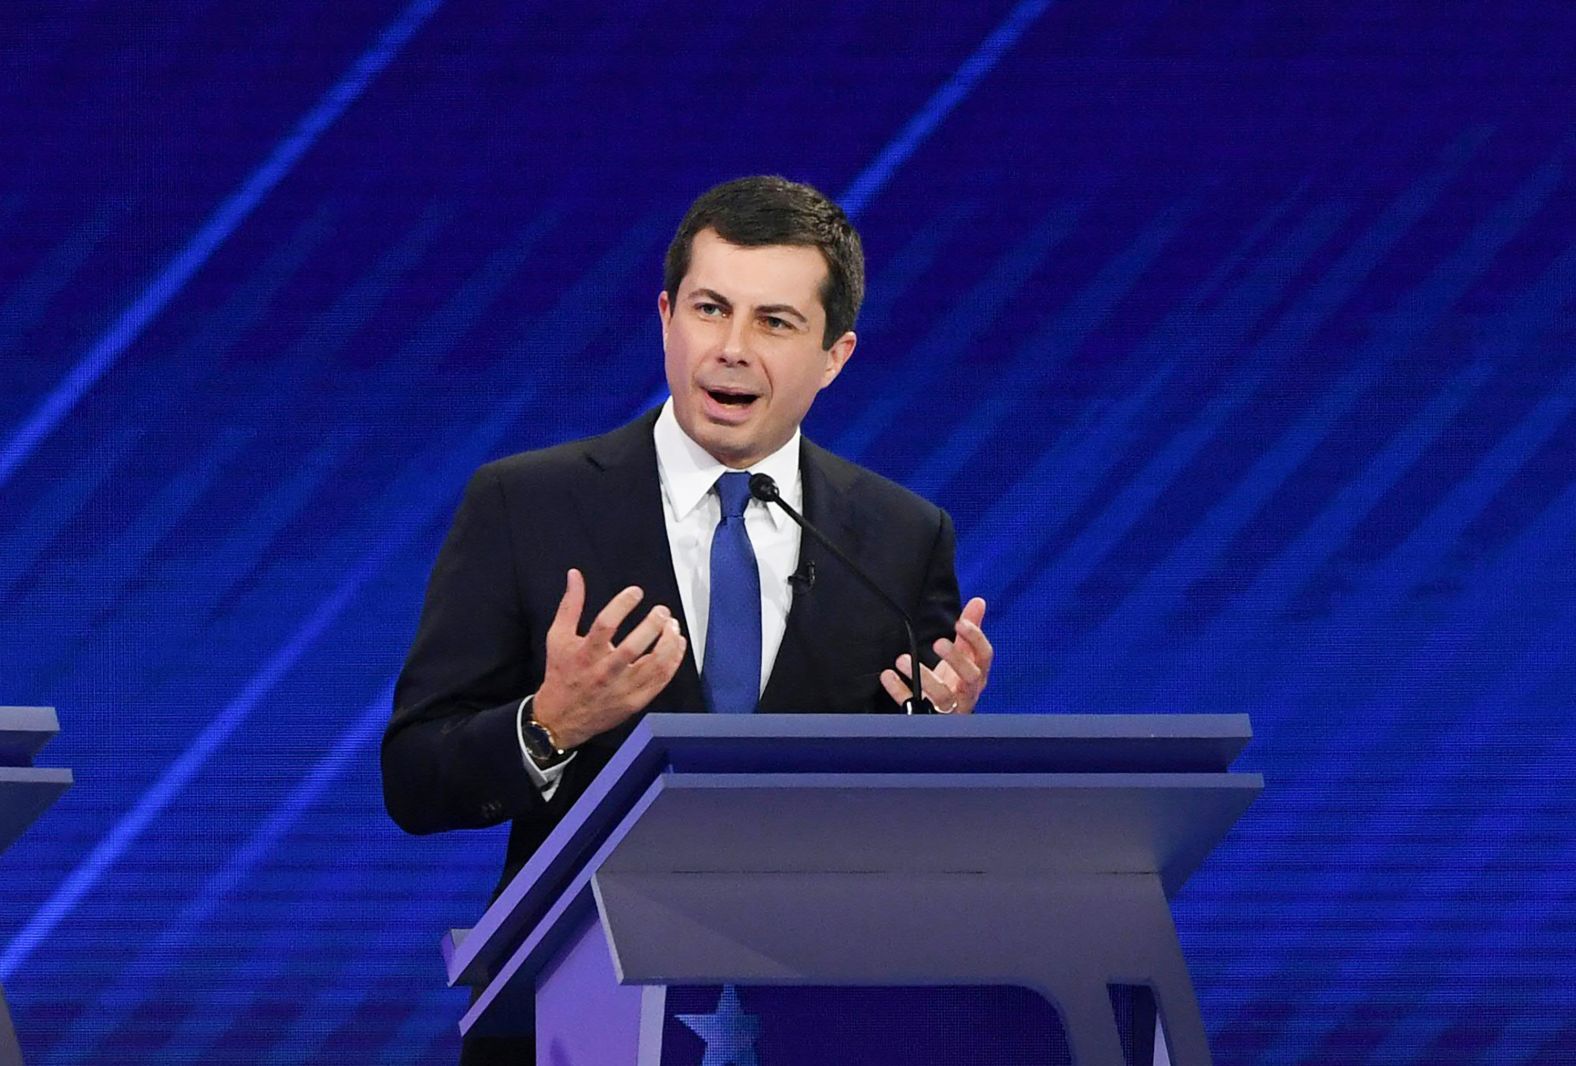 Buttigieg <a href="https://www.cnn.com/politics/live-news/democratic-debate-september-2019/h_7cb873f61e455cde236d7d9ca71151be" target="_blank">criticized President Donald Trump's trade policy on China,</a> saying the President has no strategy. "Is it just me or was that supposed to happen in like April?" Buttigieg said. "It's one more example of a commitment not made." He said Trump's inability to stick with his commitments lead to "serious consequences."